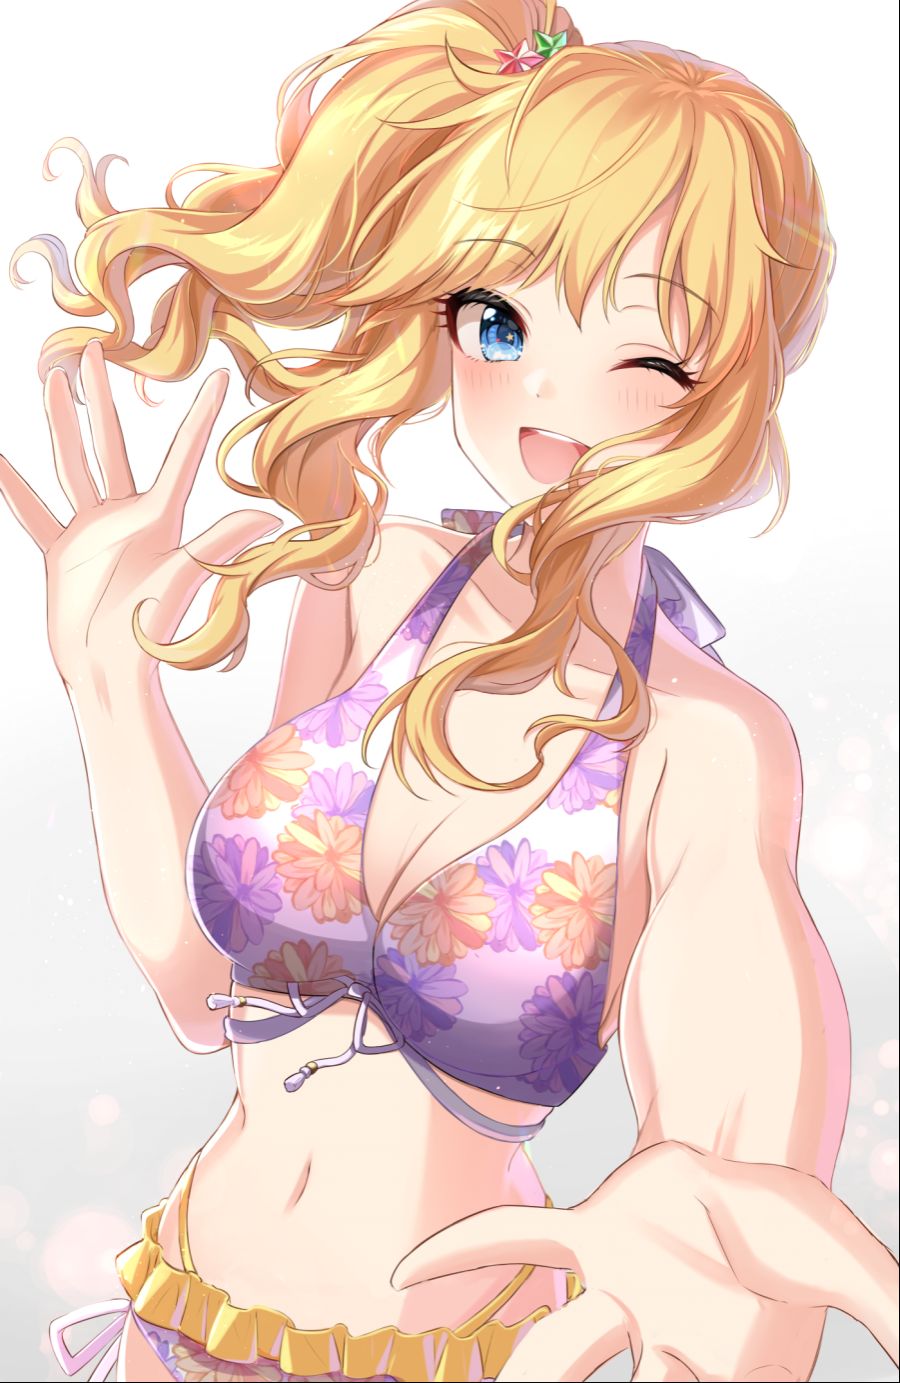 __ootsuki_yui_idolmaster_and_1_more_drawn_by_satoimo_chika__b5032df5ea1562a8cbaf73084d63a2a8.png